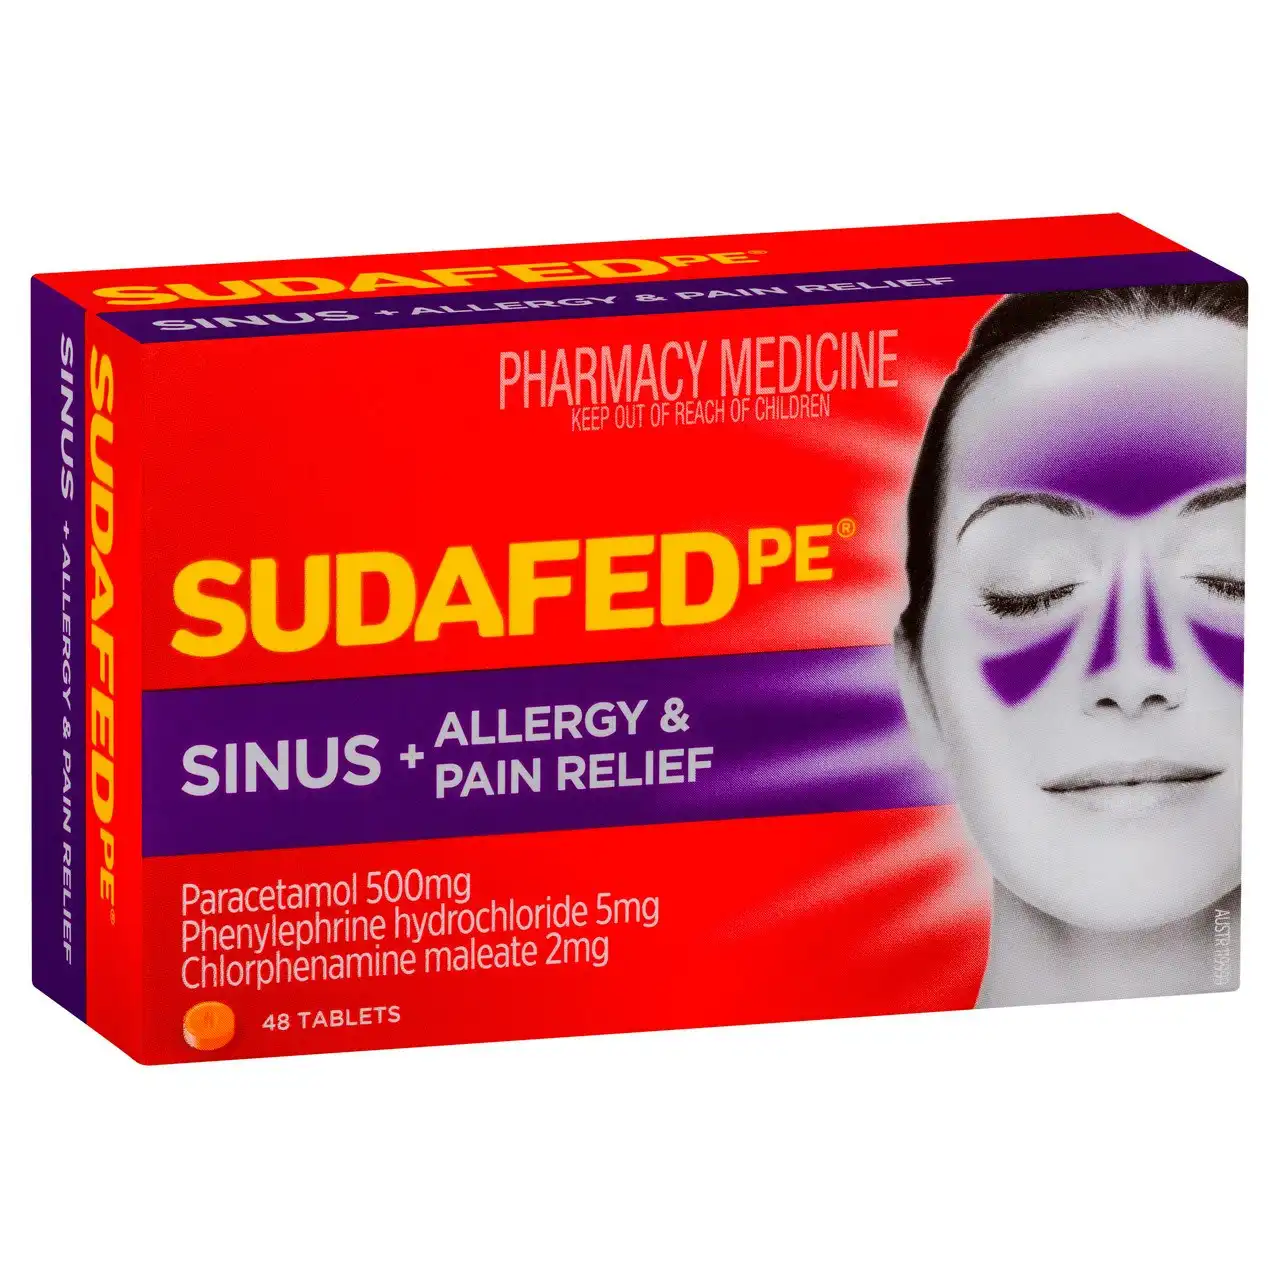 SUDAFED PE Sinus + Allergy & Pain Relief Tablets  48 Pack